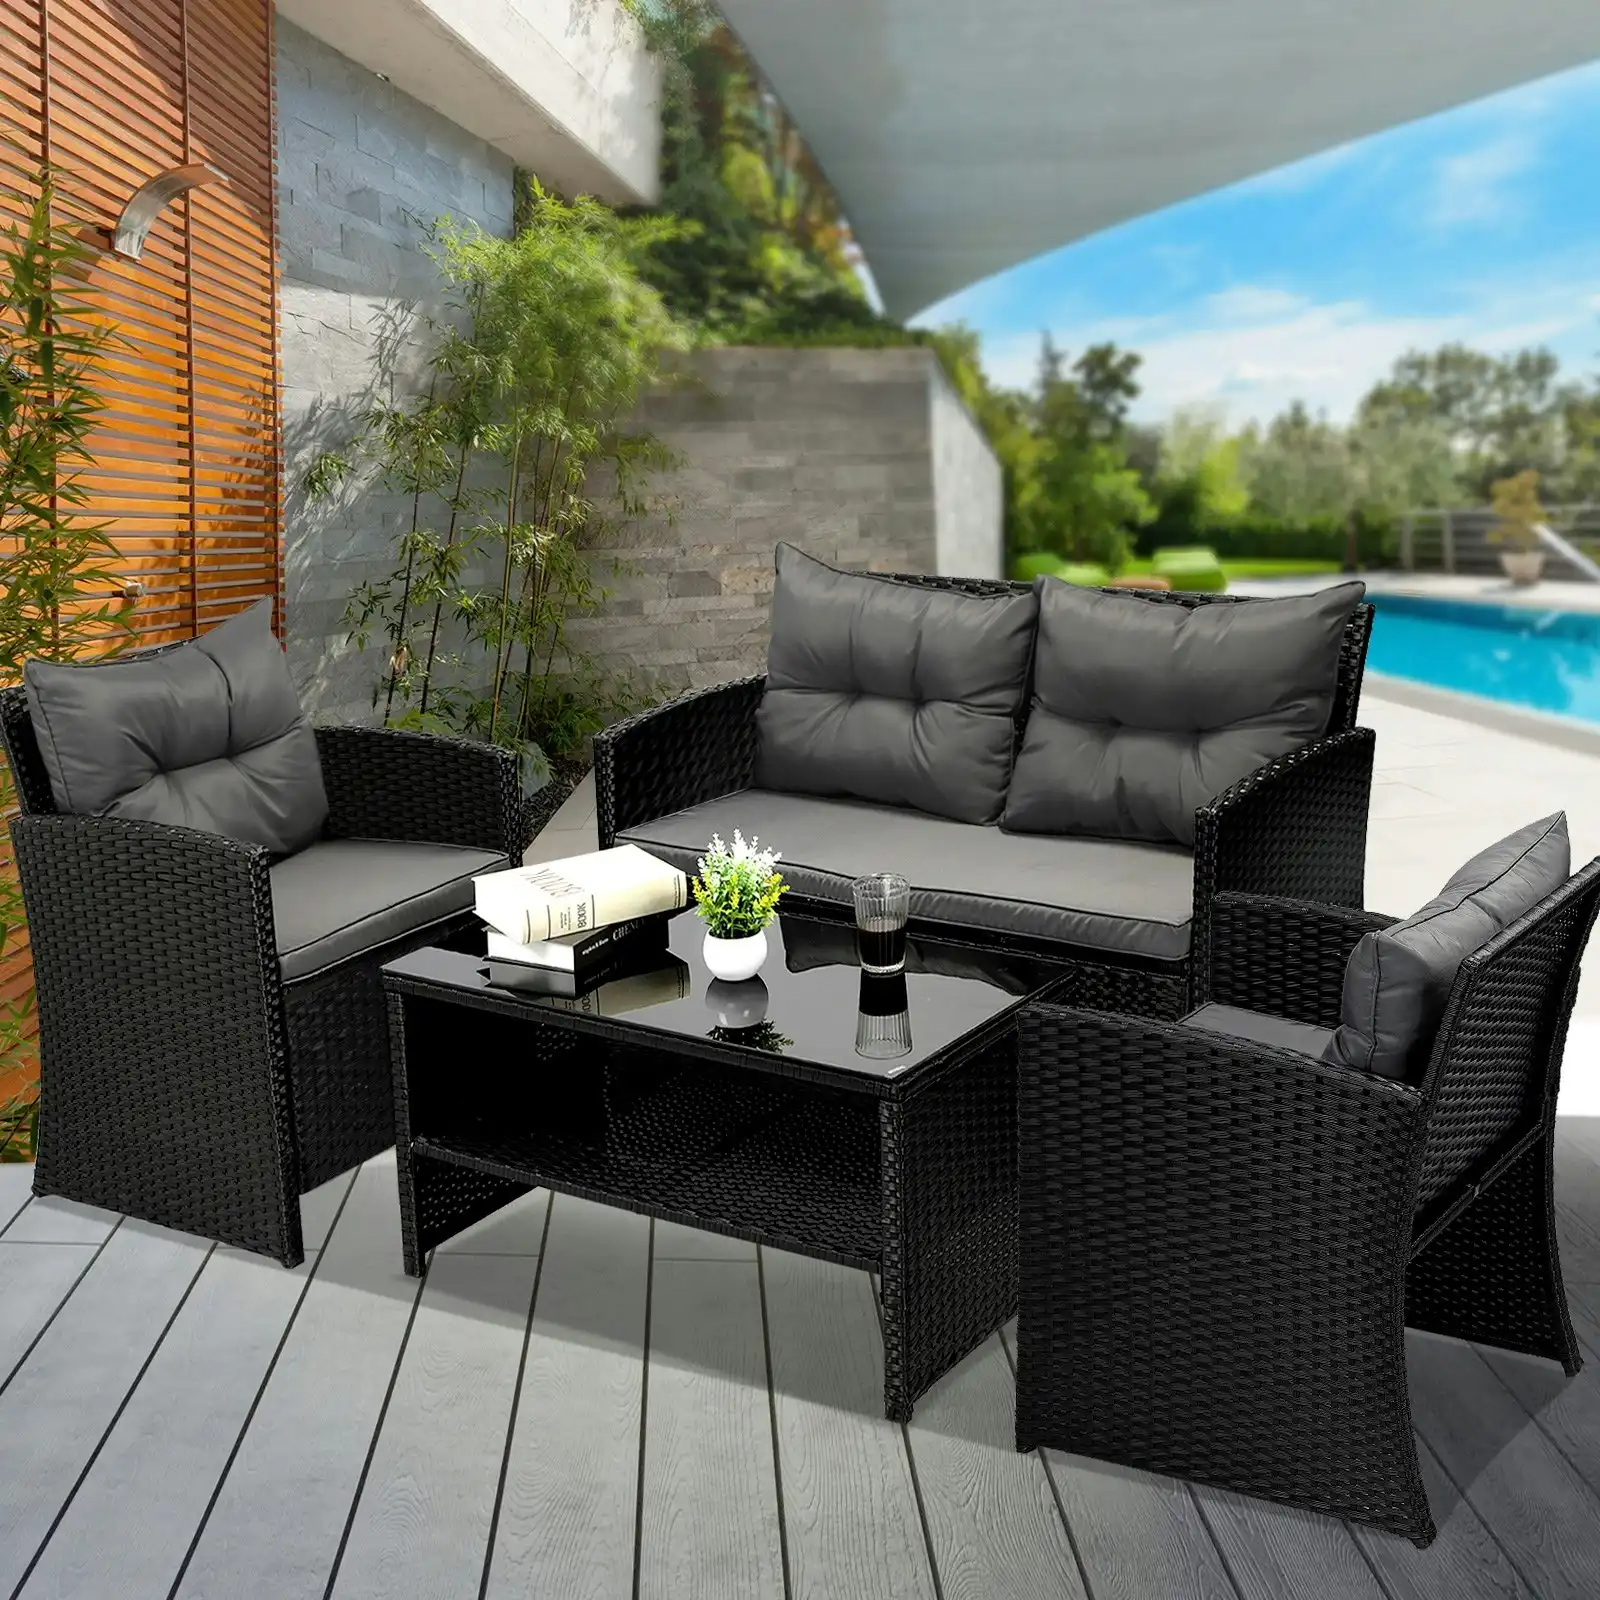 Livsip Outdoor Furniture 4 Piece Wicker Sofa Chair Table Dining Lounge Set